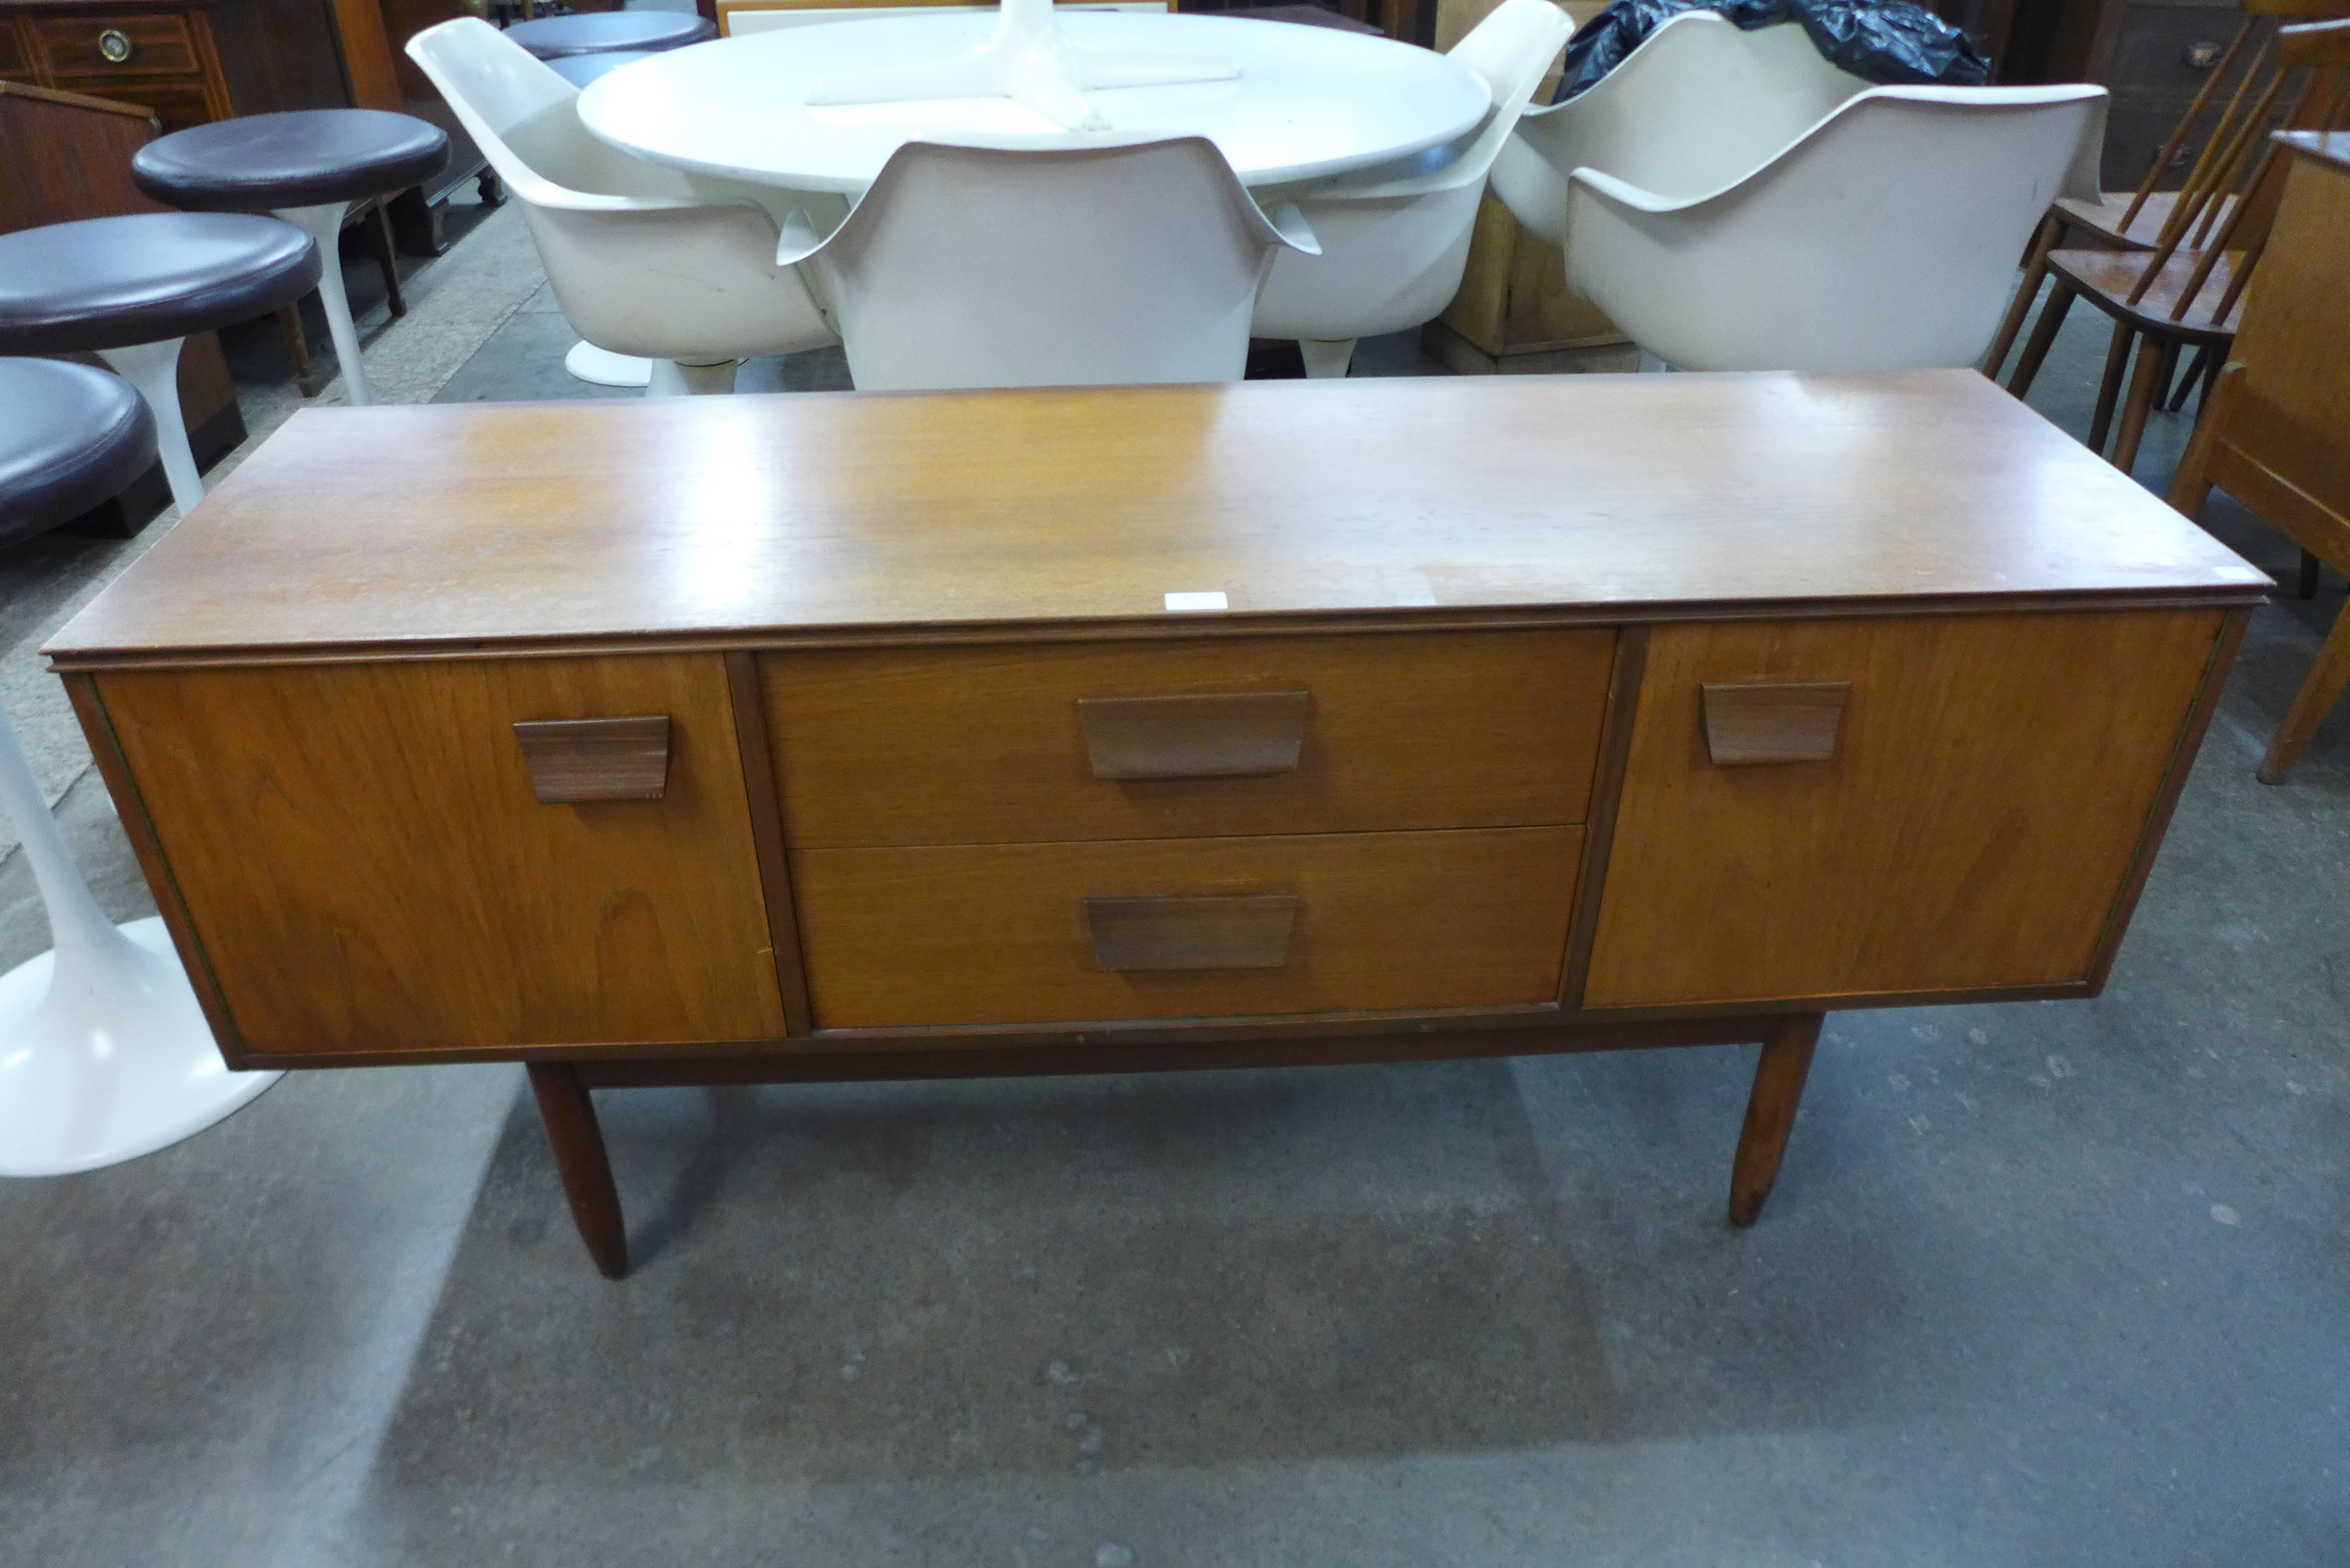 A small teak sideboard - Image 2 of 2